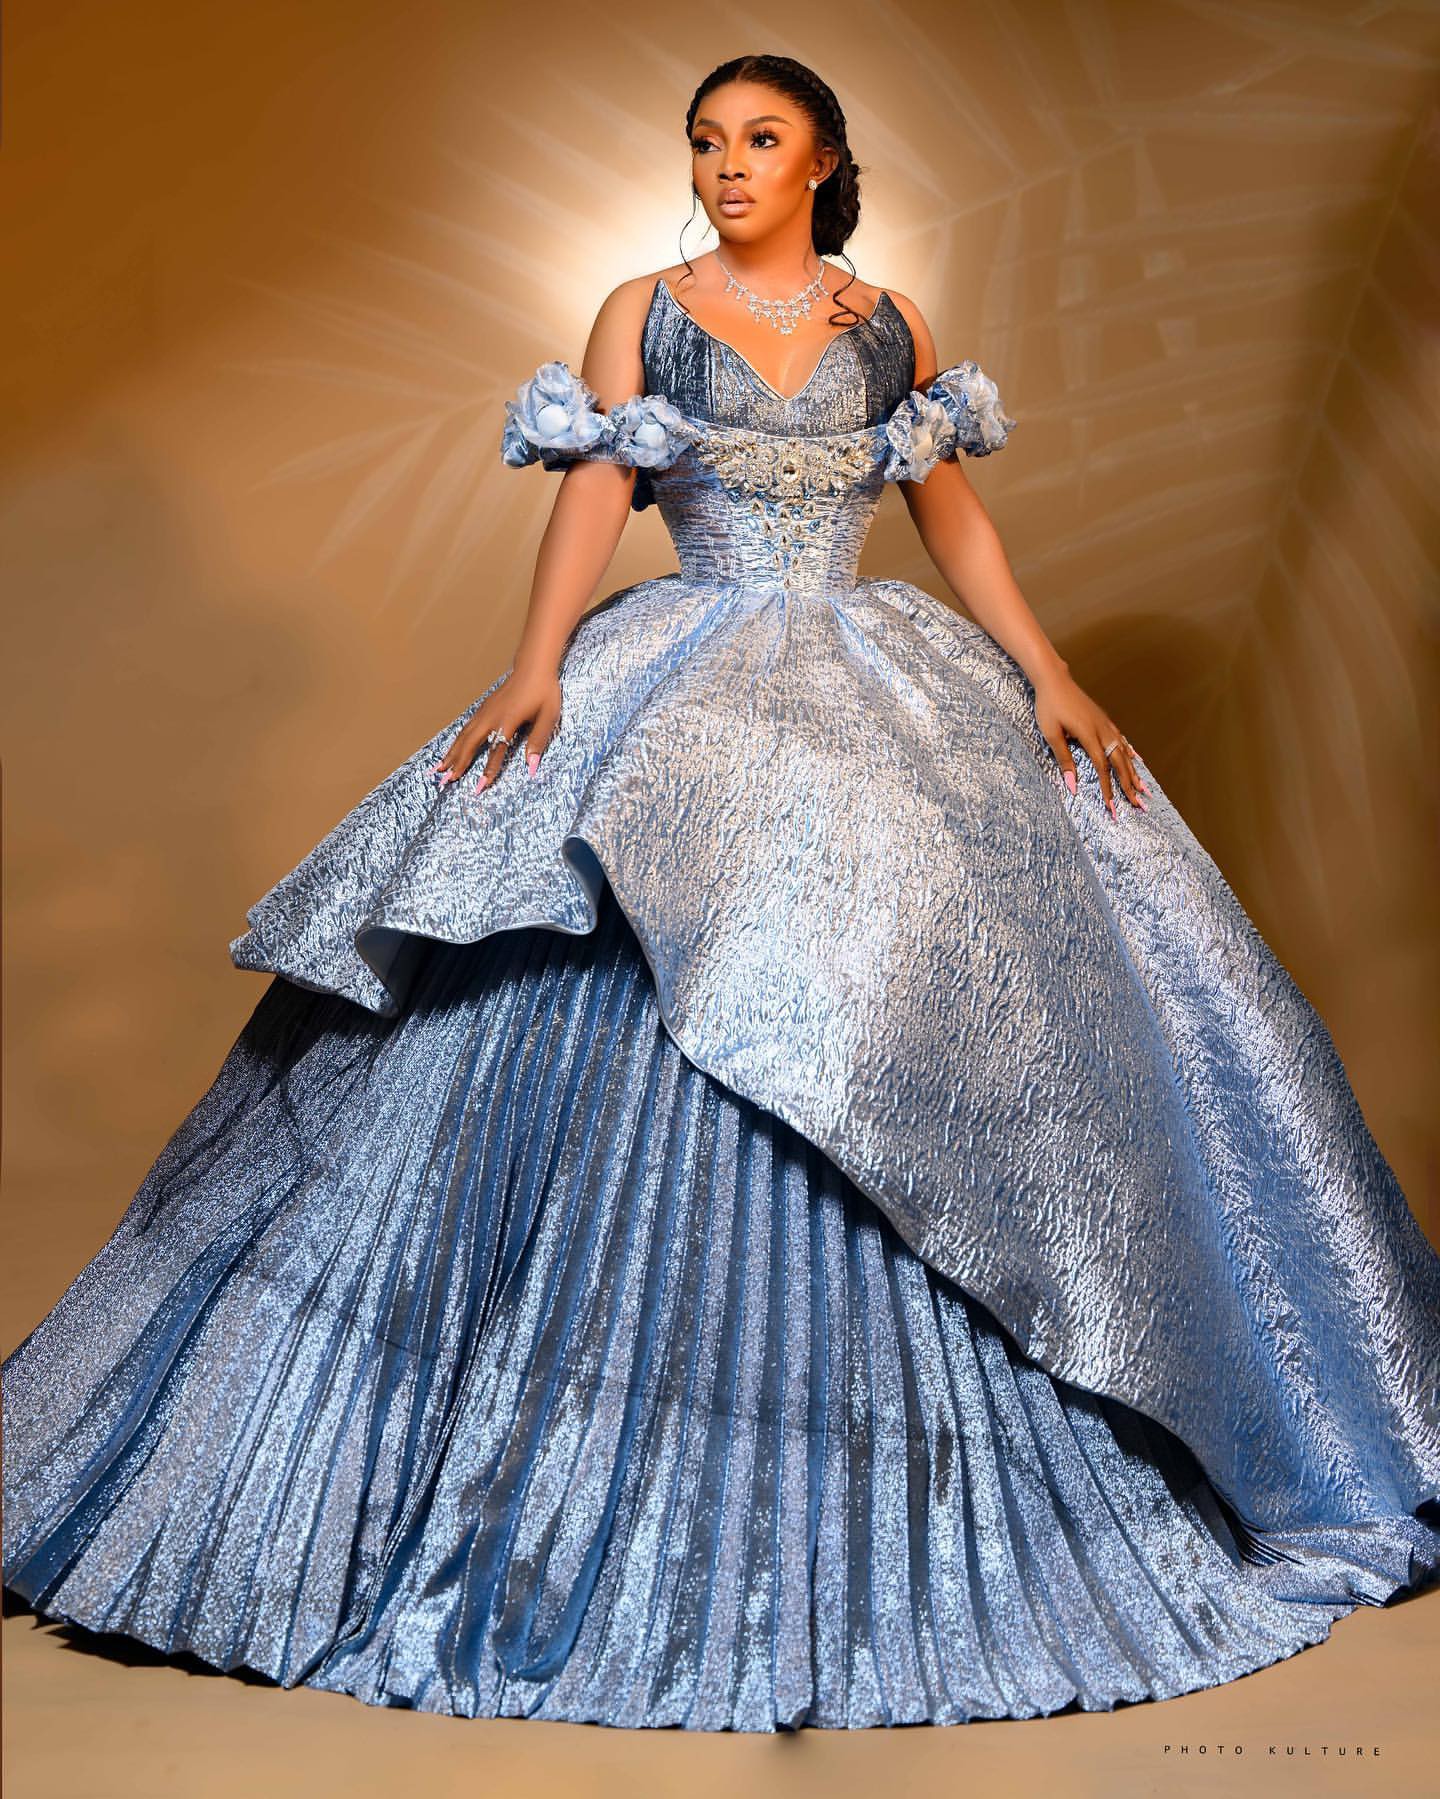 the-best-dressed-ladies-at-the-amvca-2023-event